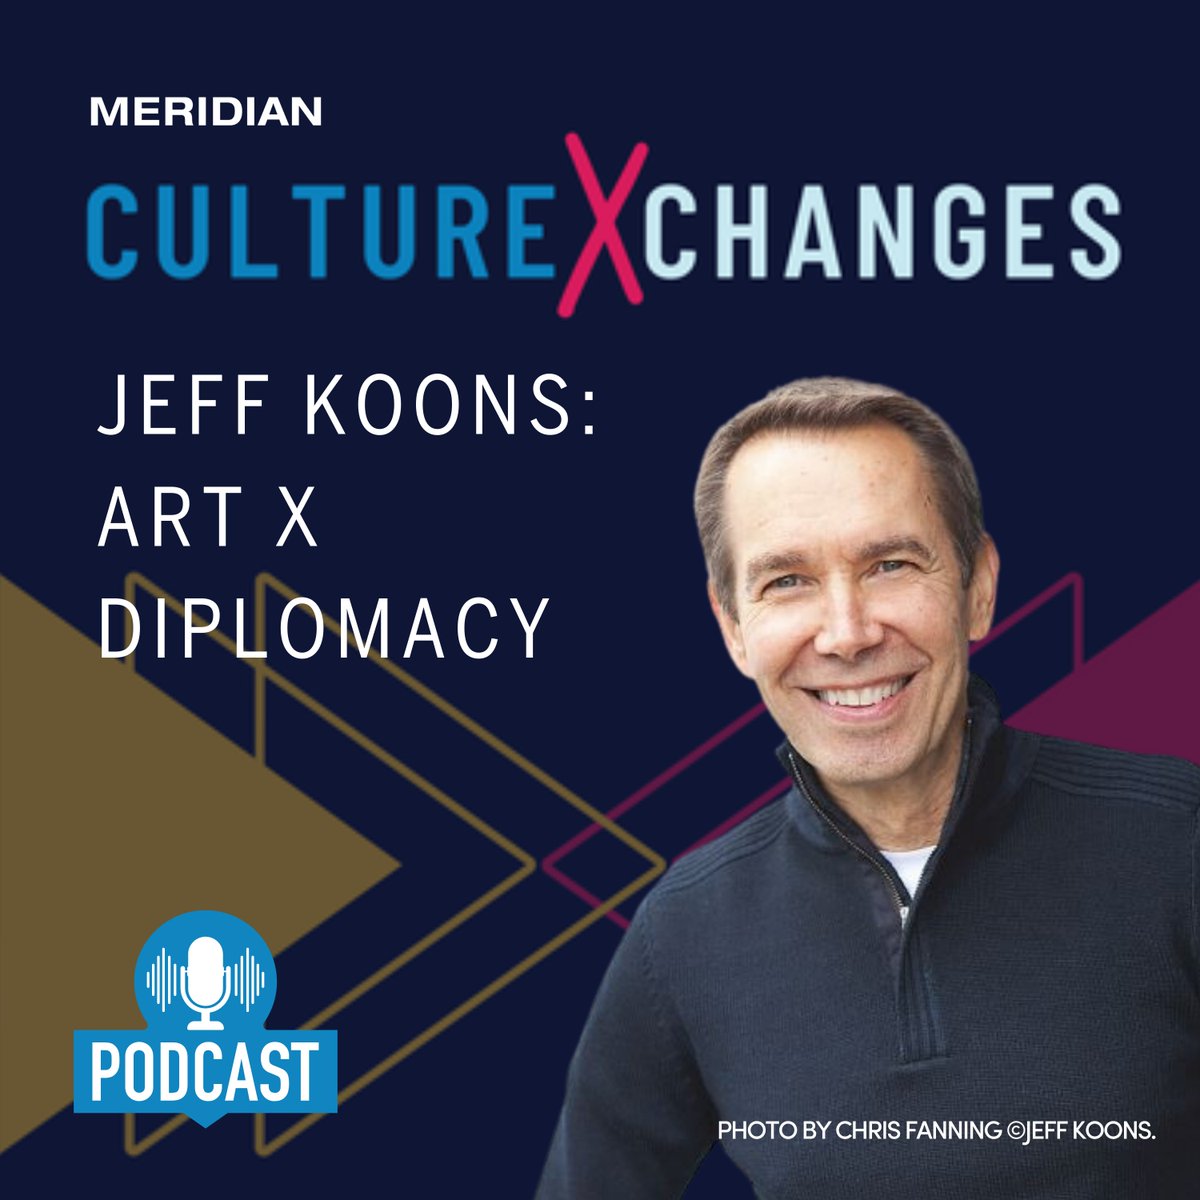 Delighted to share the latest episode of Meridian’s podcast: cultureXcultures featuring an engaging conversation with renowned global artist @JeffKoons. You can listen to the podcast here: shows.acast.com/638776ed285bb6… or anywhere you listen to podcasts. Key takeaways include unique…